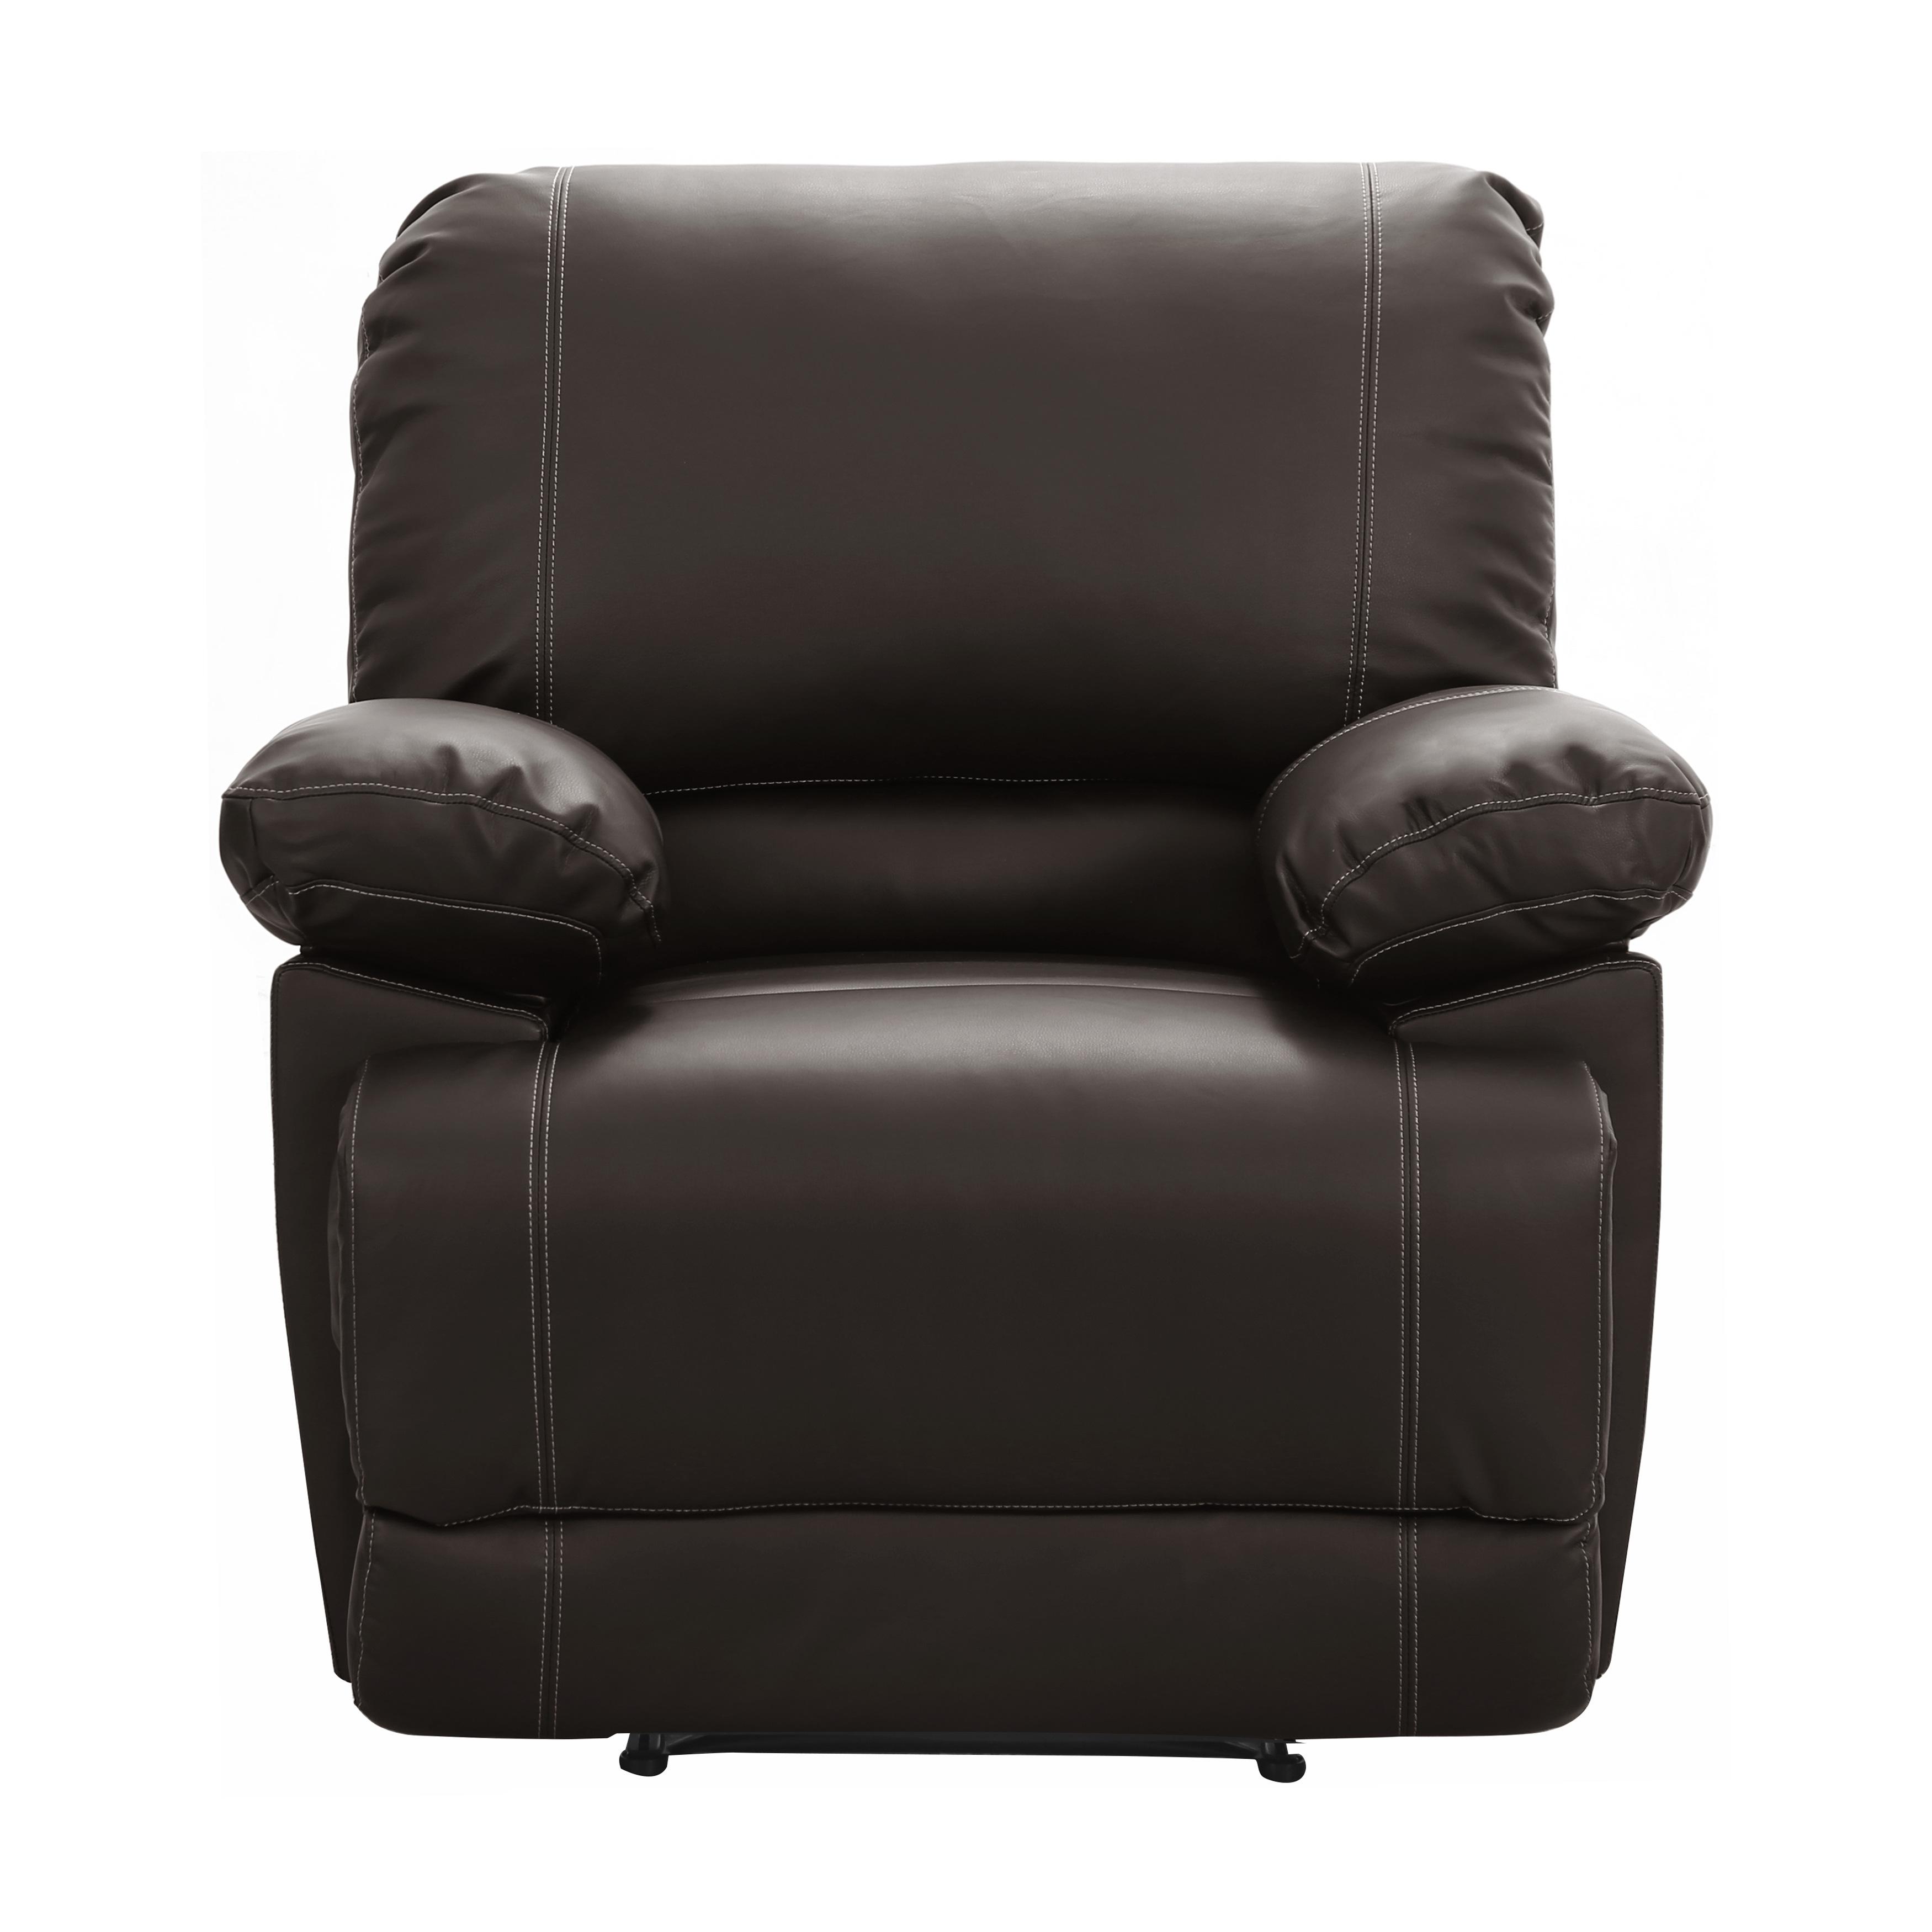 Transitional Reclining Chair Cassville Chair 8403-1-C 8403-1-C in Brown Faux Leather